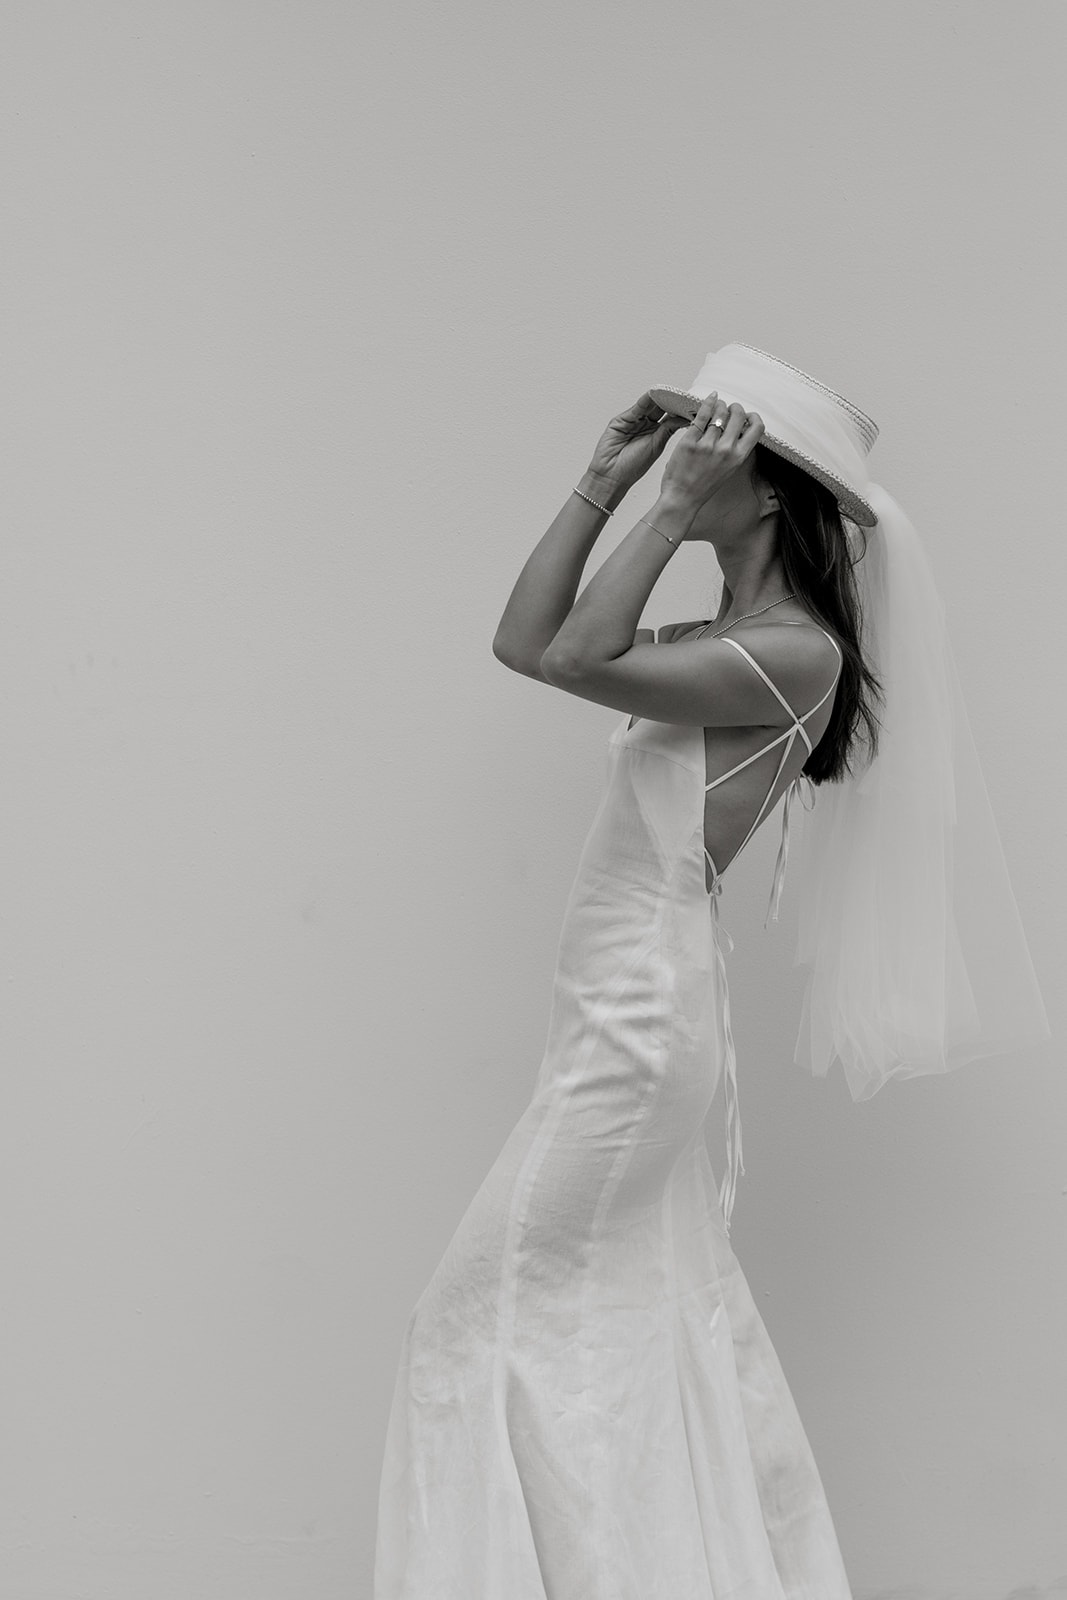 Editorial bridal portrait while bride wears hat and elegant gown